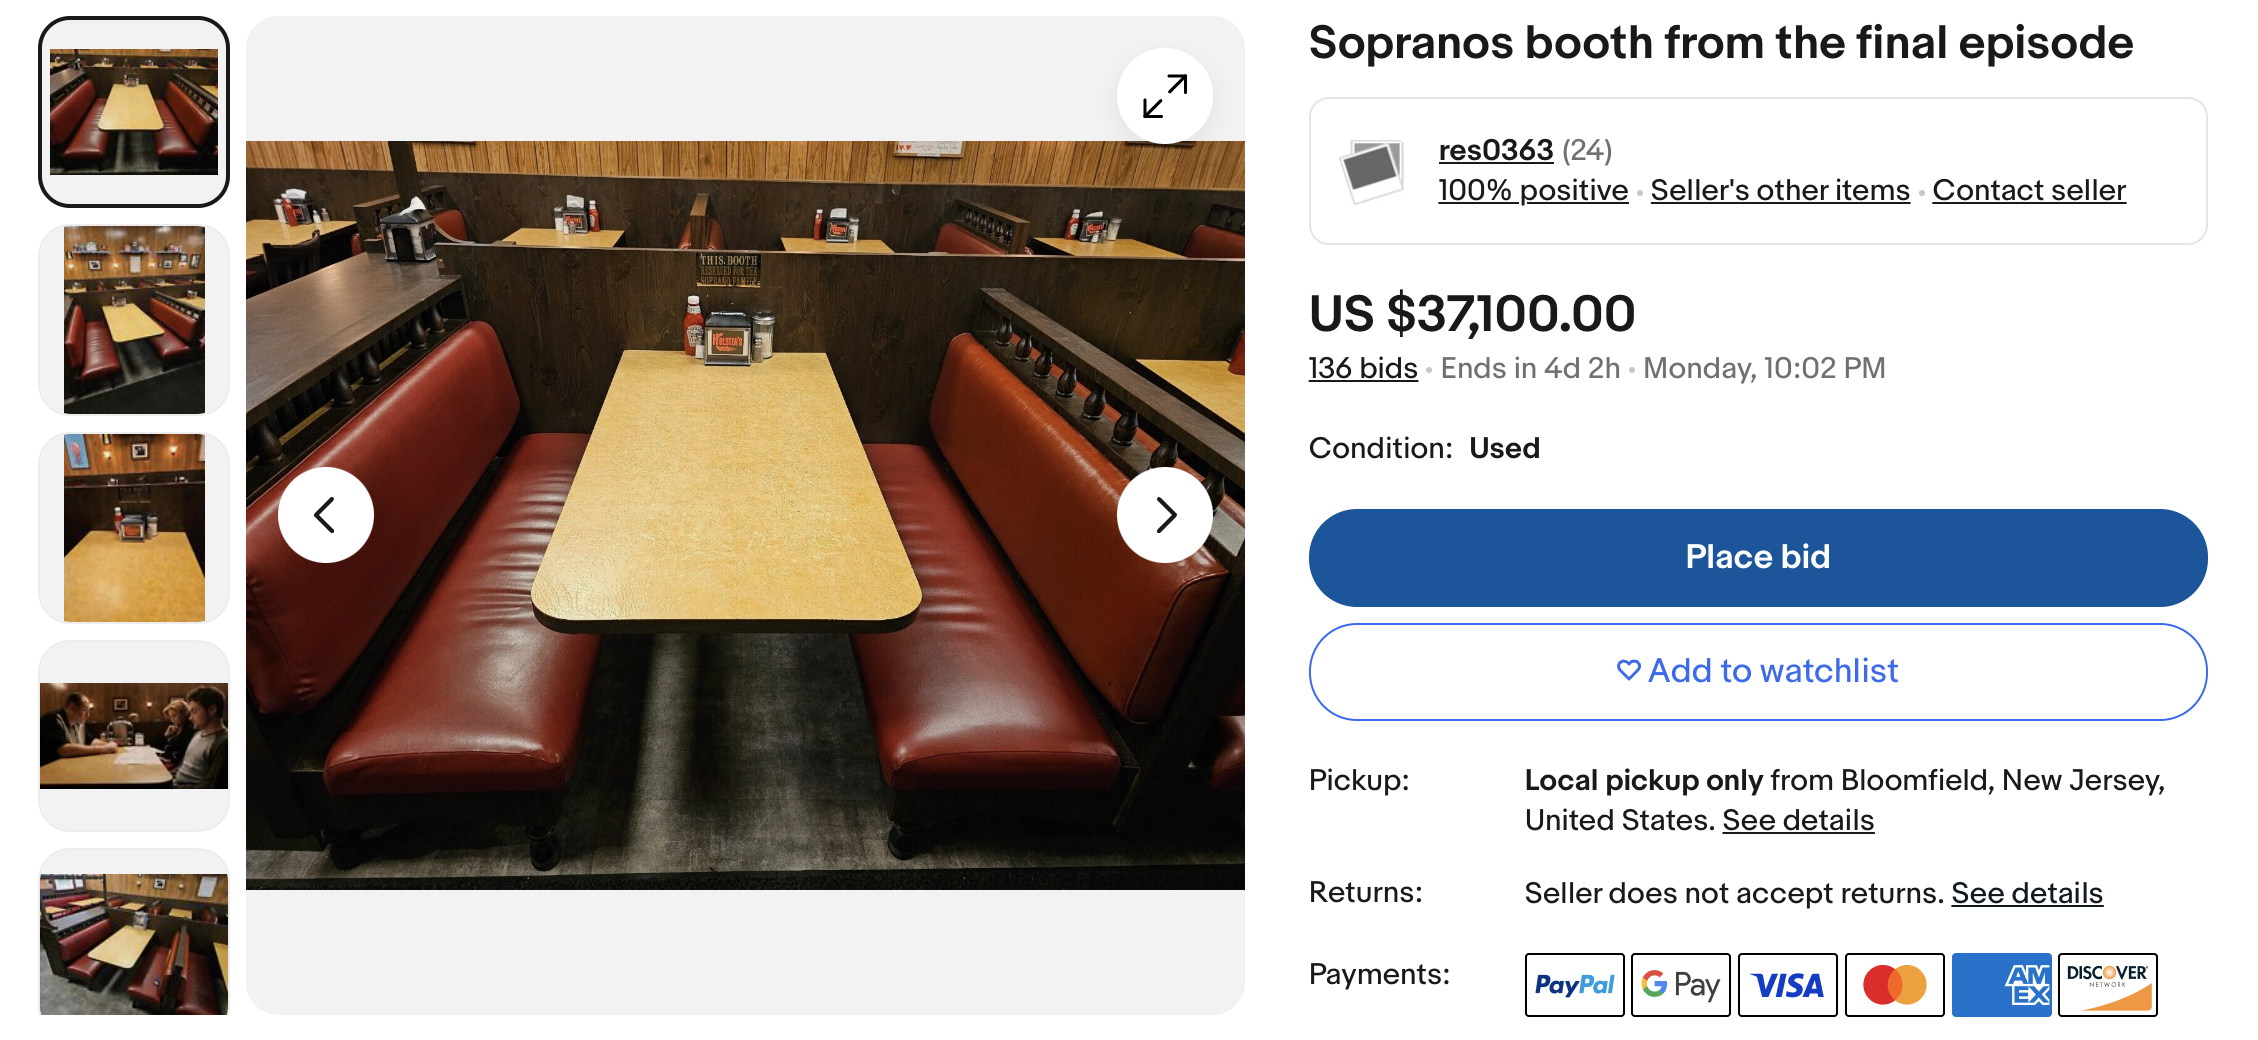 A booth from The Sopranos&#x27; final episode is up for auction